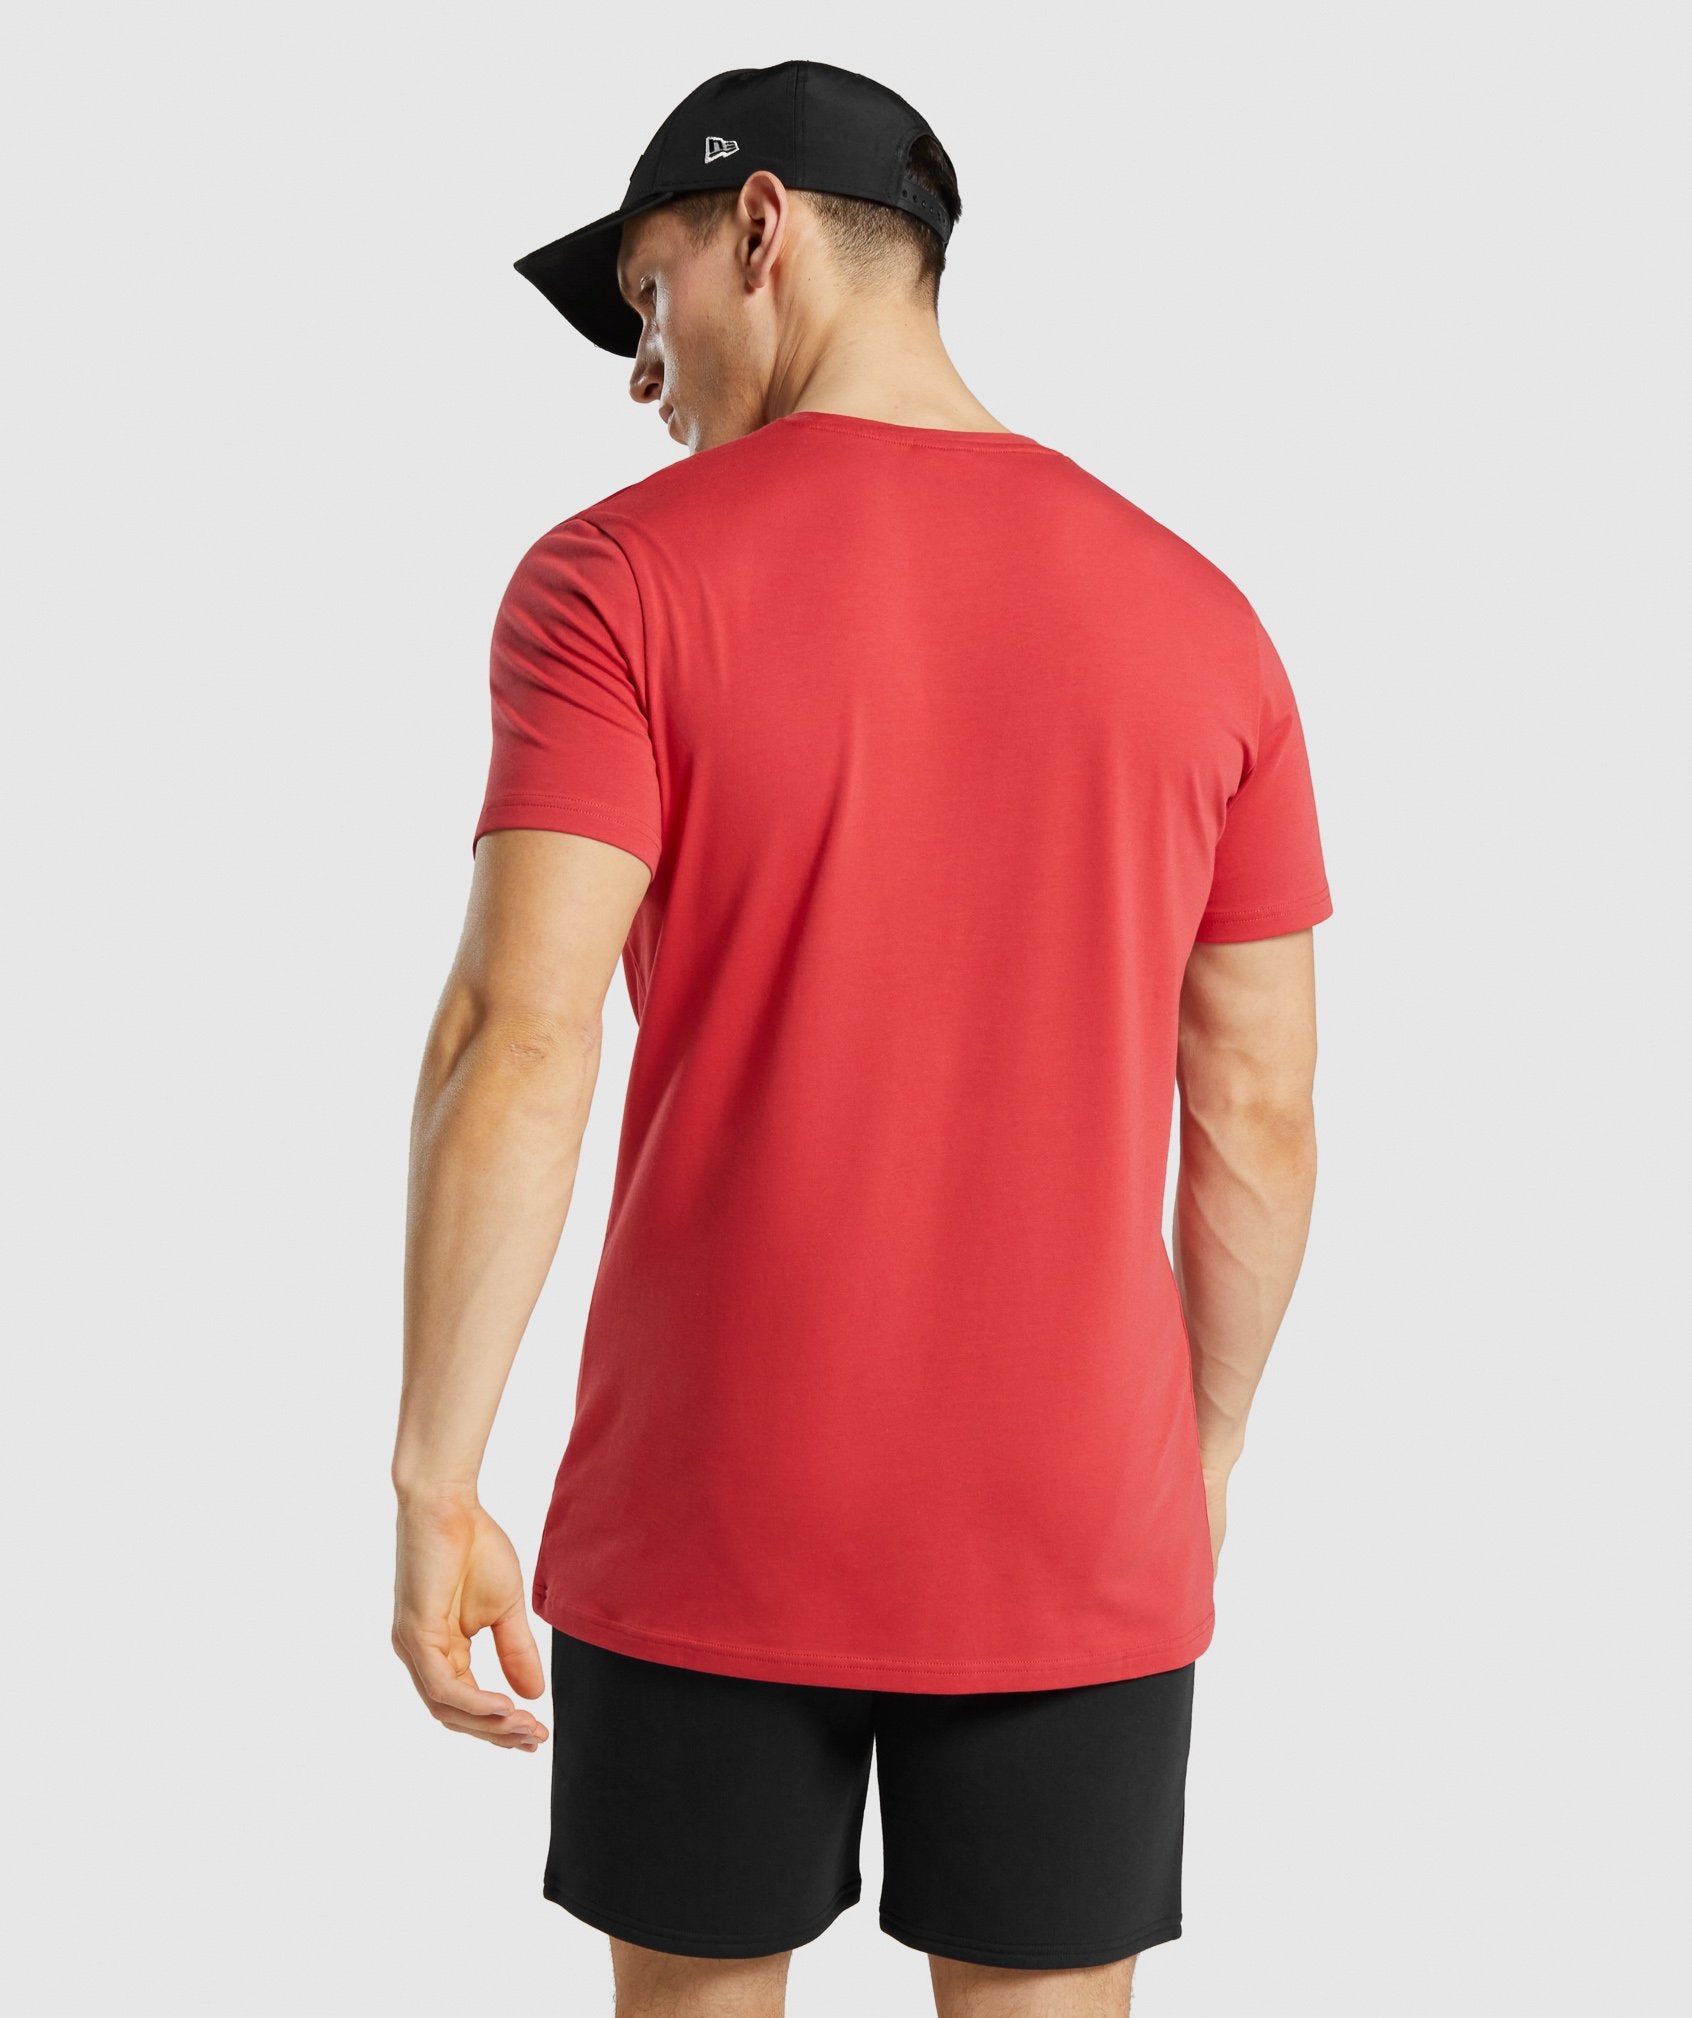 Legacy T-Shirt in Red - view 3